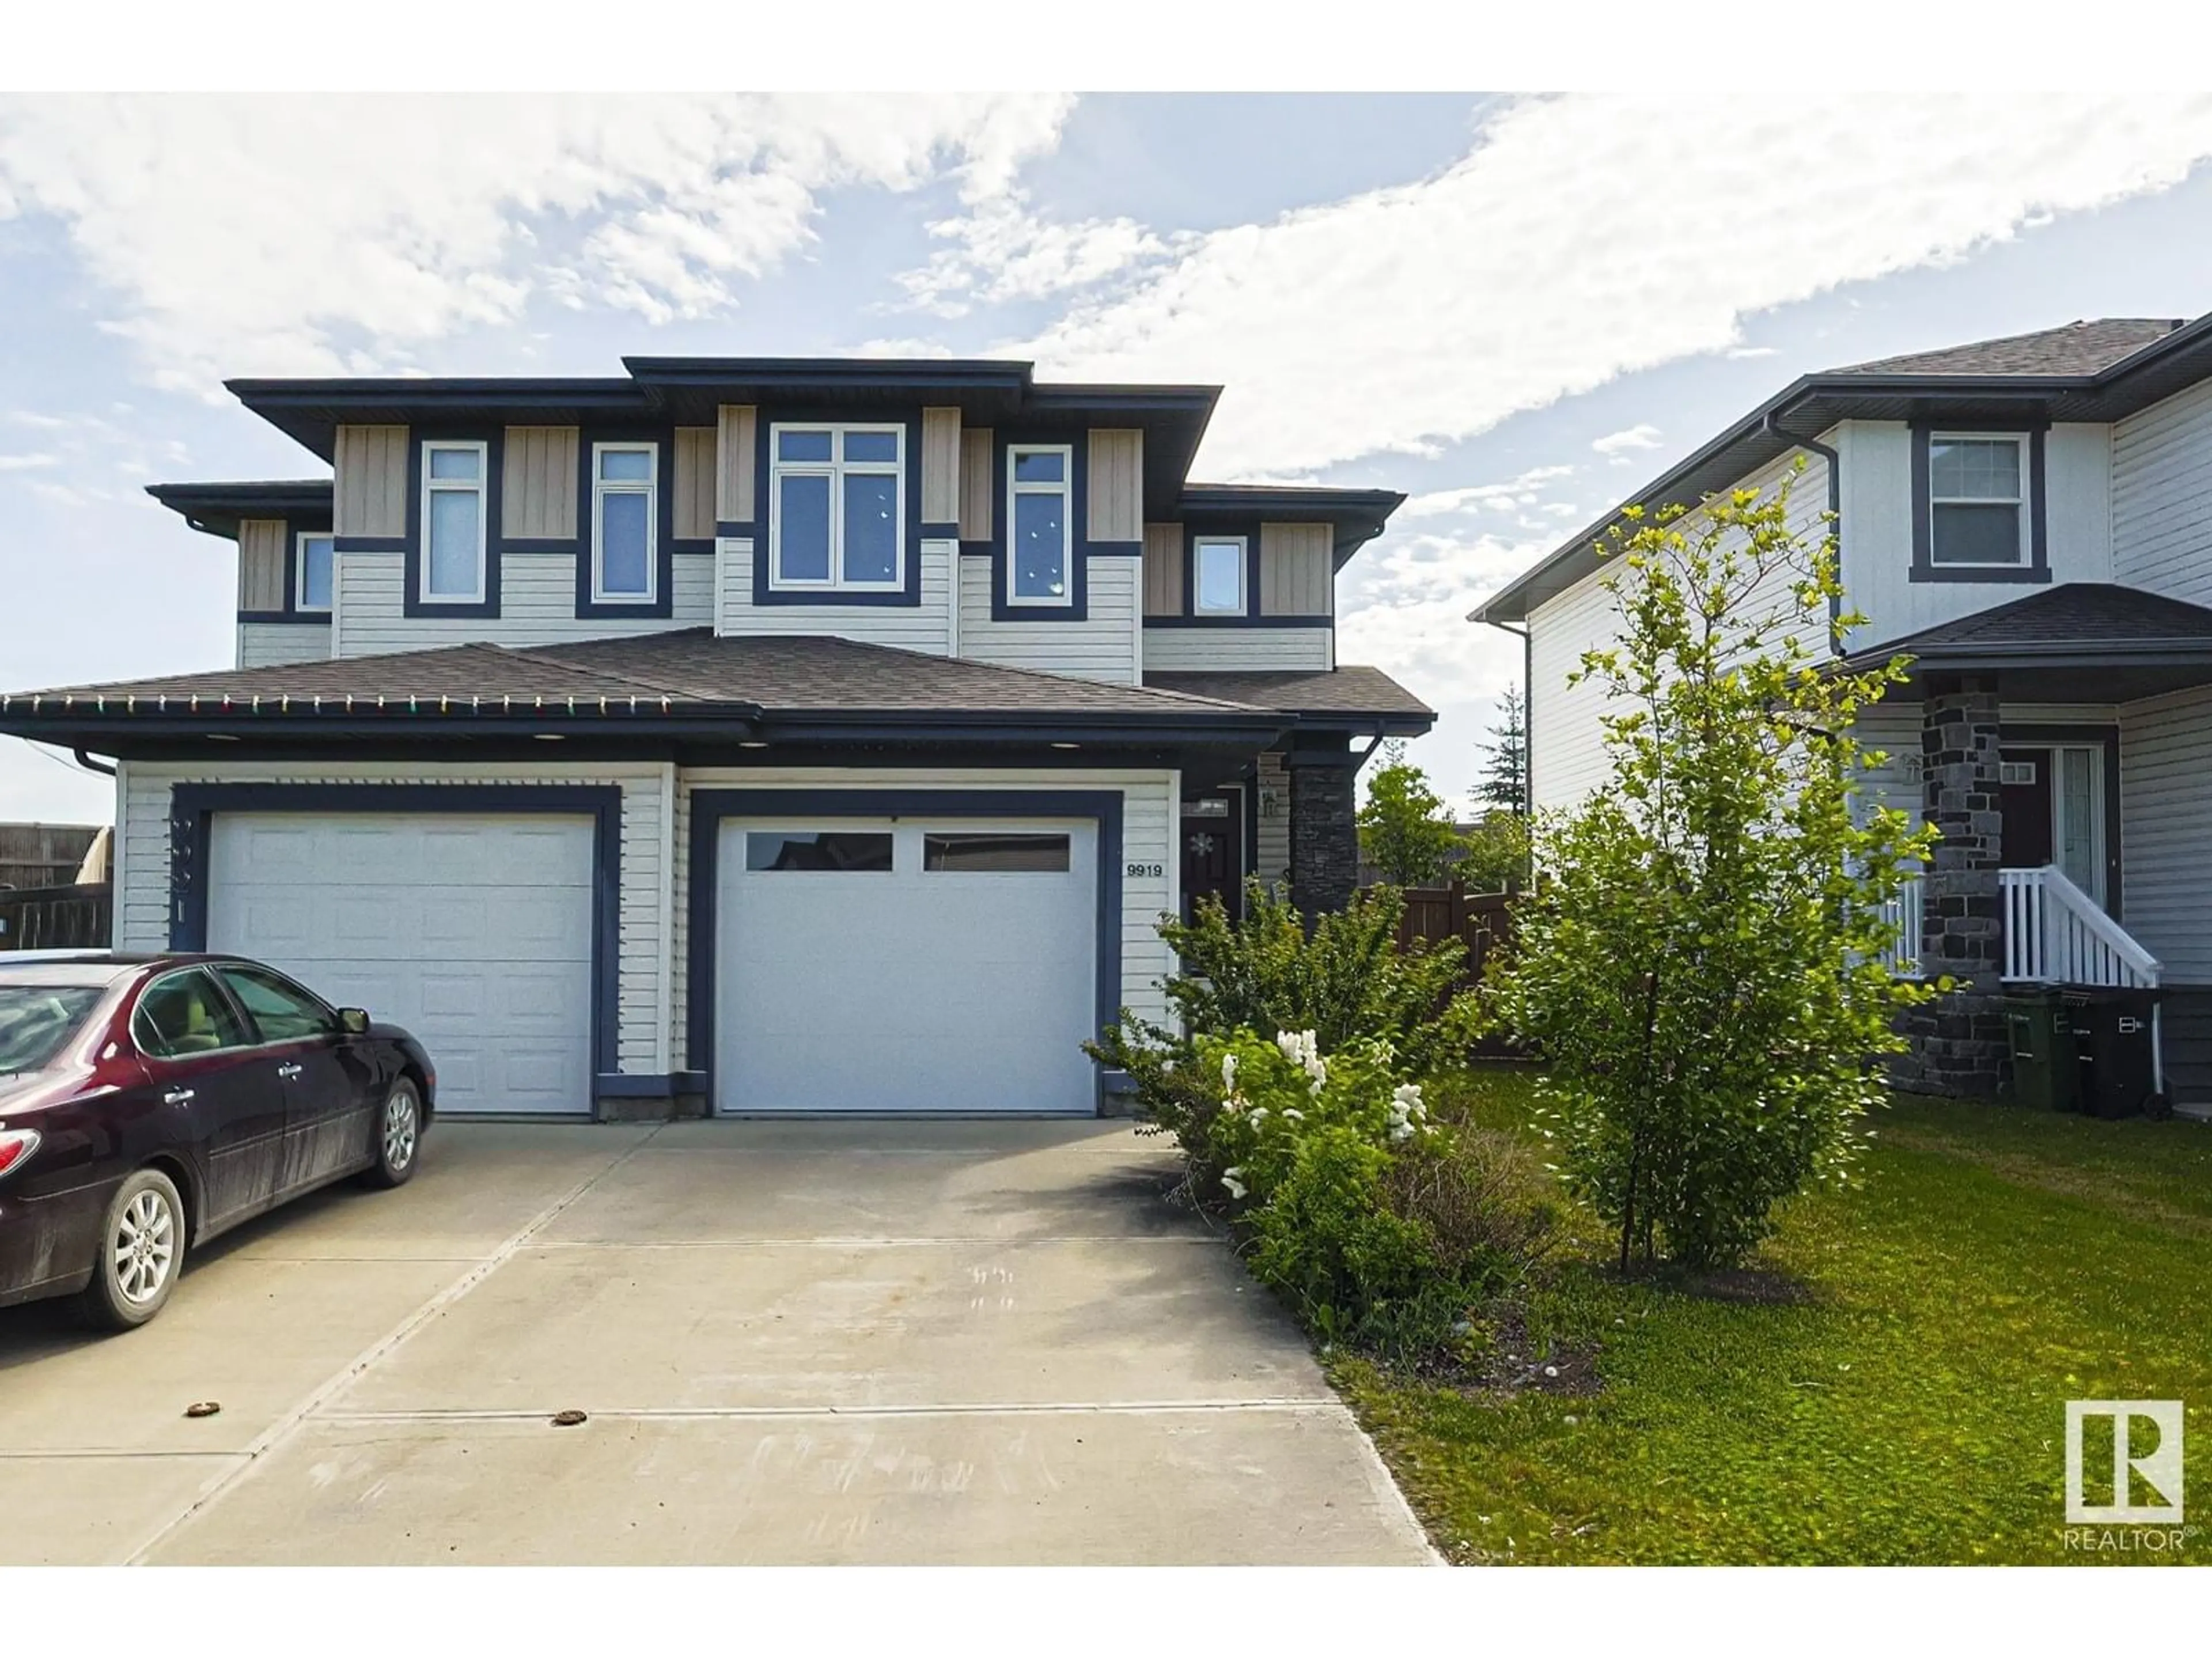 A pic from exterior of the house or condo for 9919 217 ST NW NW, Edmonton Alberta T5T4T5